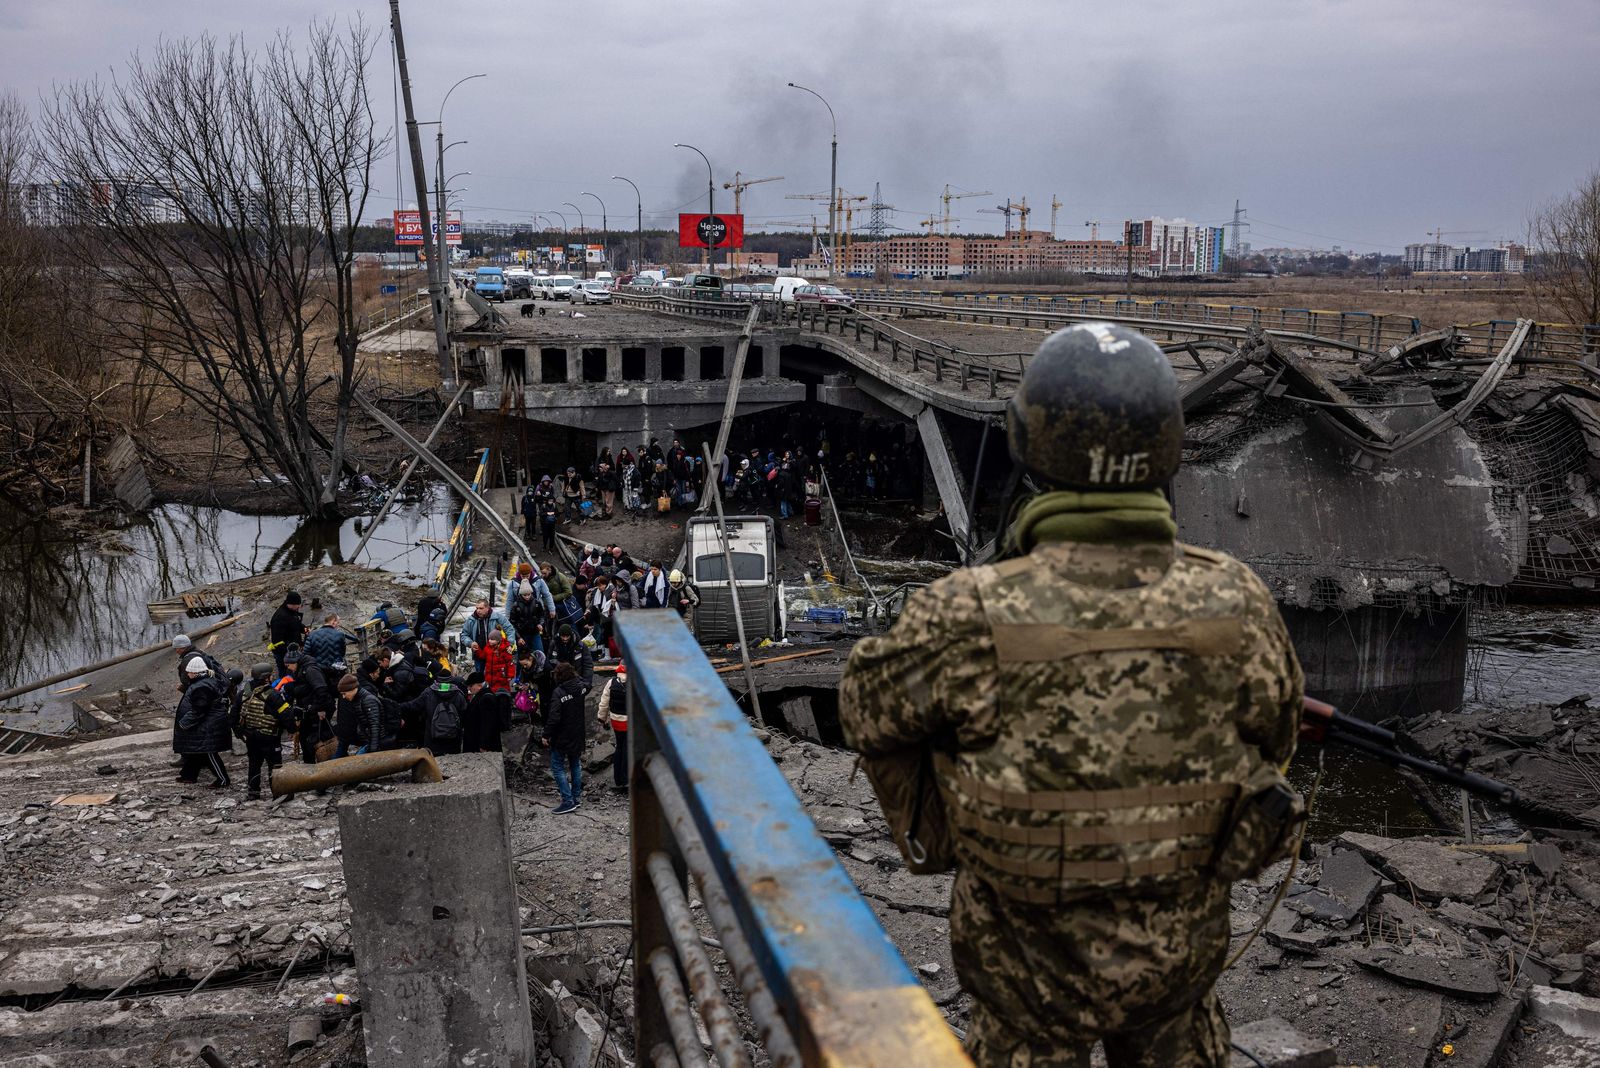 A Ukrainian serviceman looks on as evacuees cross a destroyed bridge as they flee the city of Irpin, northwest of Kyiv, on March 7, 2022. - Ukraine dismissed Moscow's offer to set up humanitarian corridors from several bombarded cities on Monday after it emerged some routes would lead refugees into Russia or Belarus. The Russian proposal of safe passage from Kharkiv, Kyiv, Mariupol and Sumy had come after terrified Ukrainian civilians came under fire in previous ceasefire attempts. (Photo by Dimitar DILKOFF / AFP) - AFP